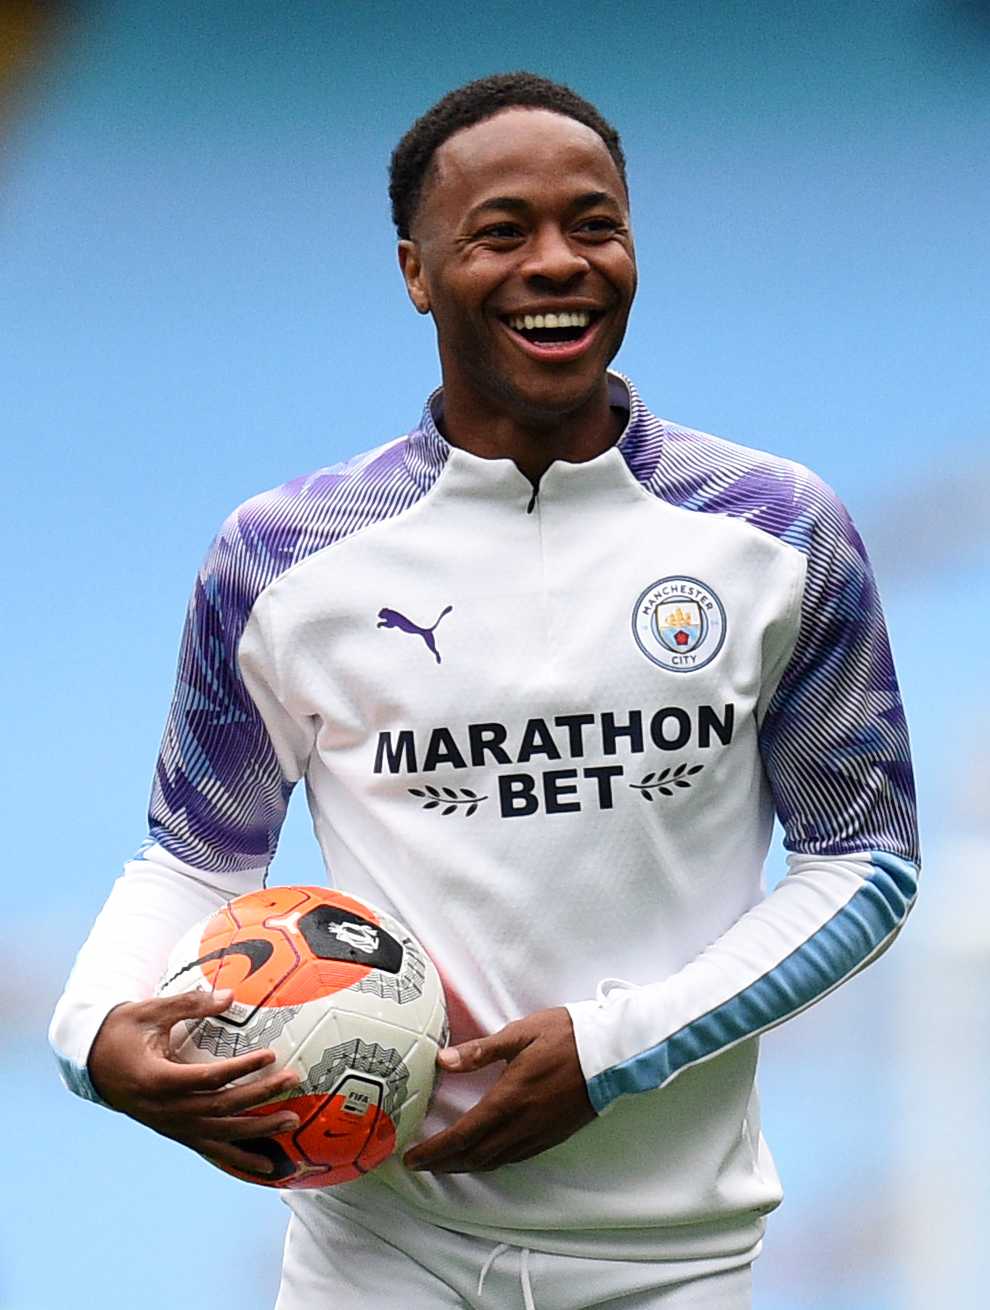 Sterling will be tested again before he links up with the England squad ahead of their match on September 5